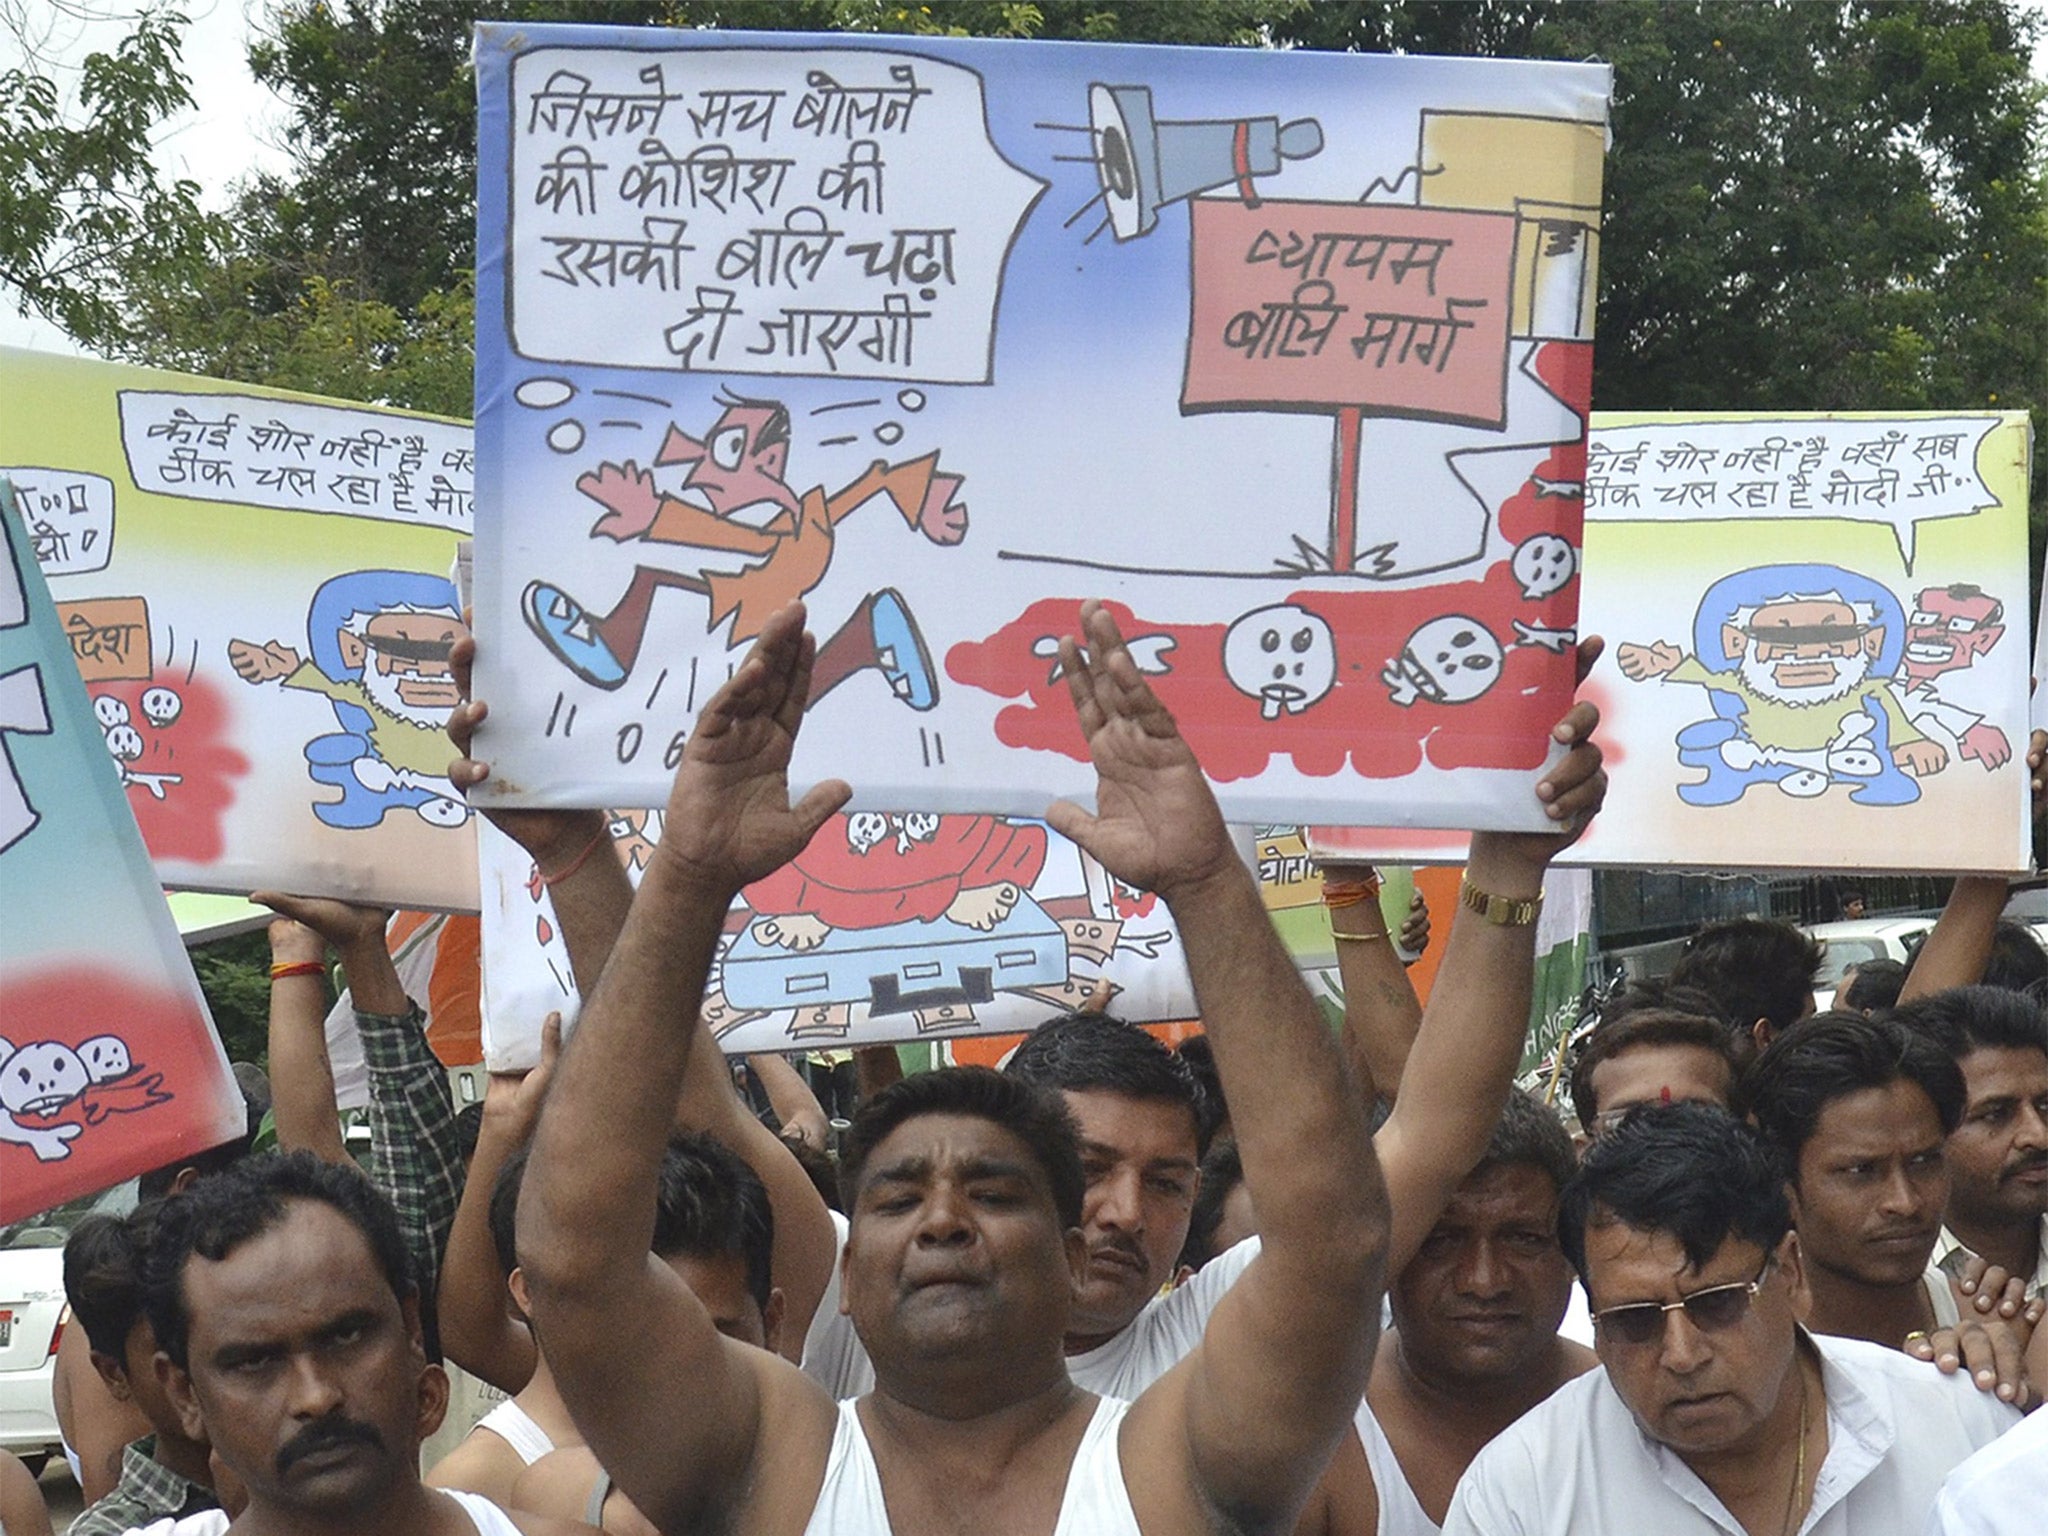 Protesters hit the streets in response to the Vyapam scandal in Bhopal